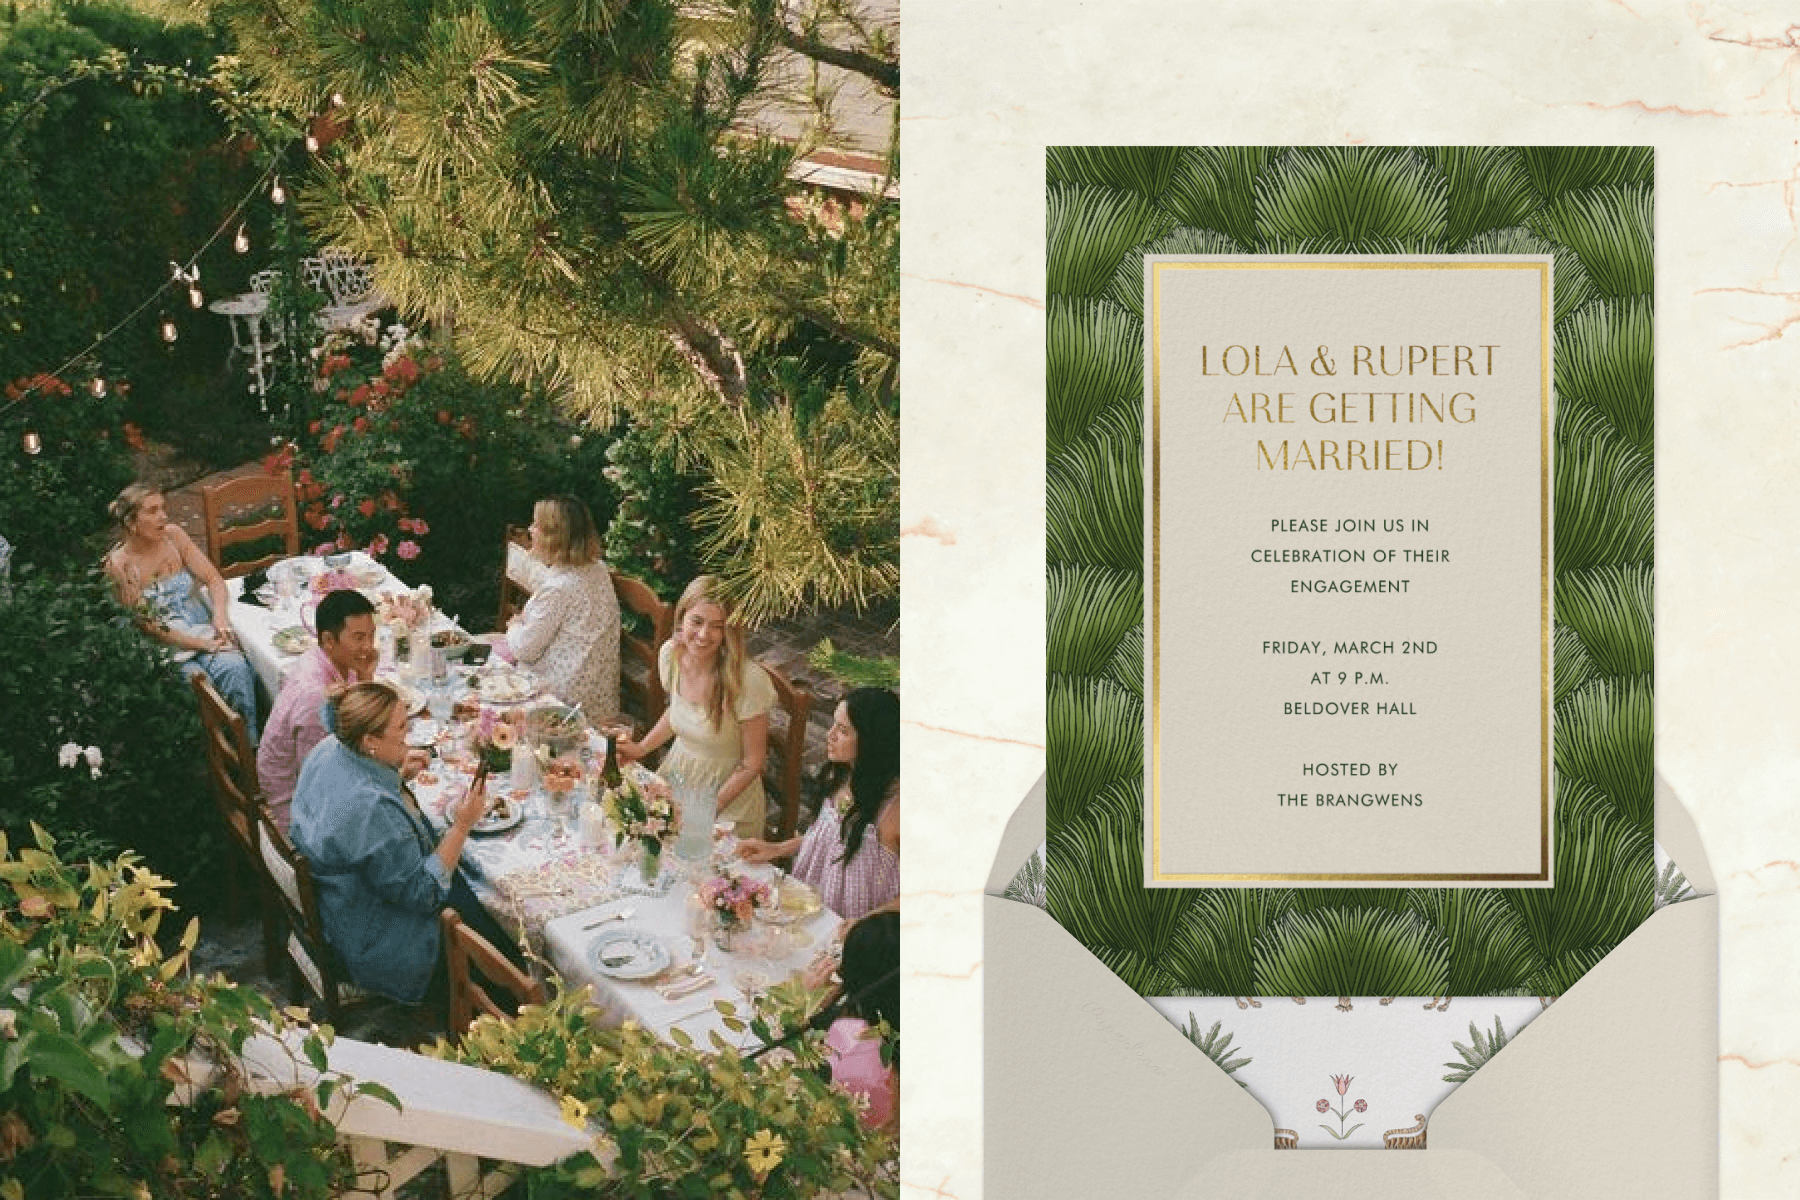 Left: Guests sitting at a lush garden party table; Right: An engagement party invitation with a border of tropical leaves.